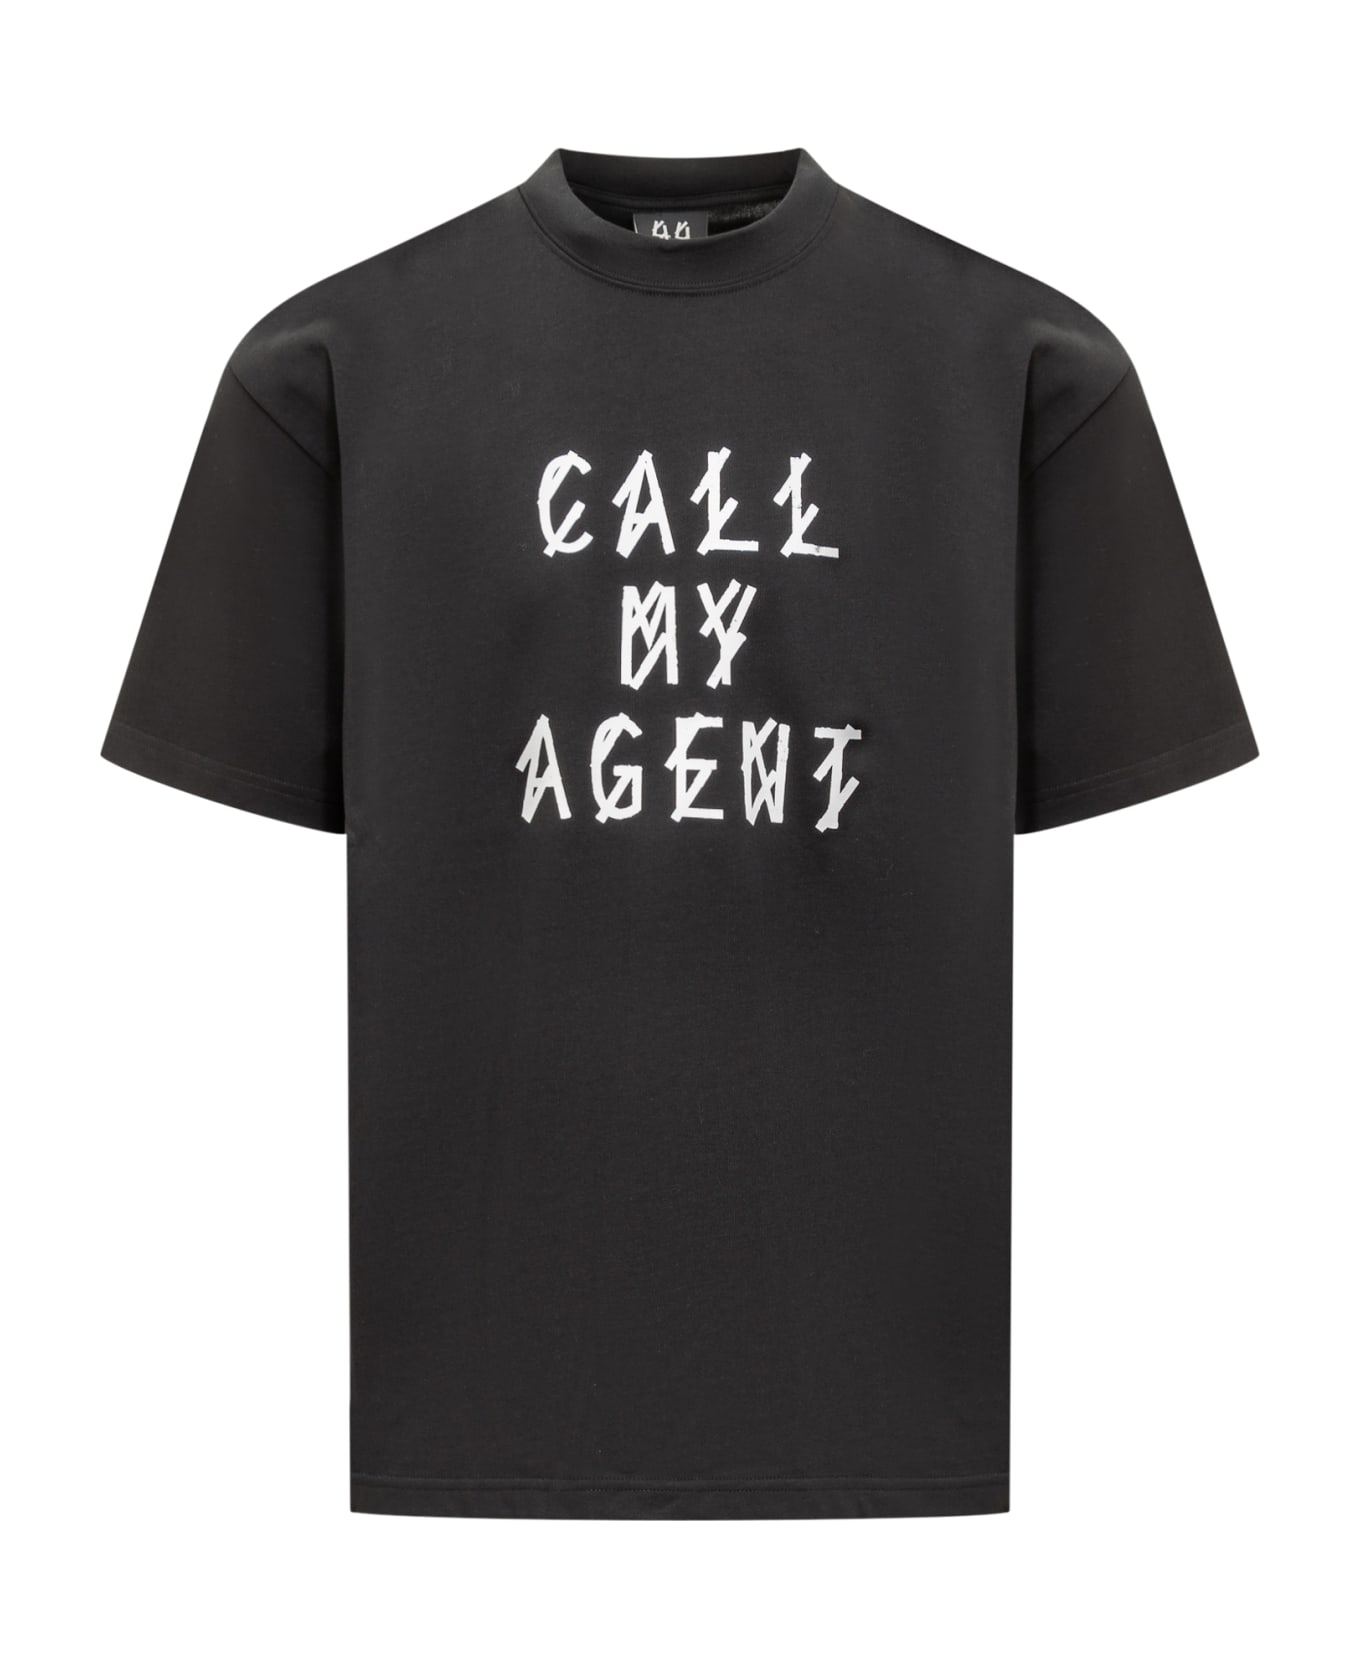 44 Label Group T-shirt With My Agent Print - BLACK-CALL MY AGENT